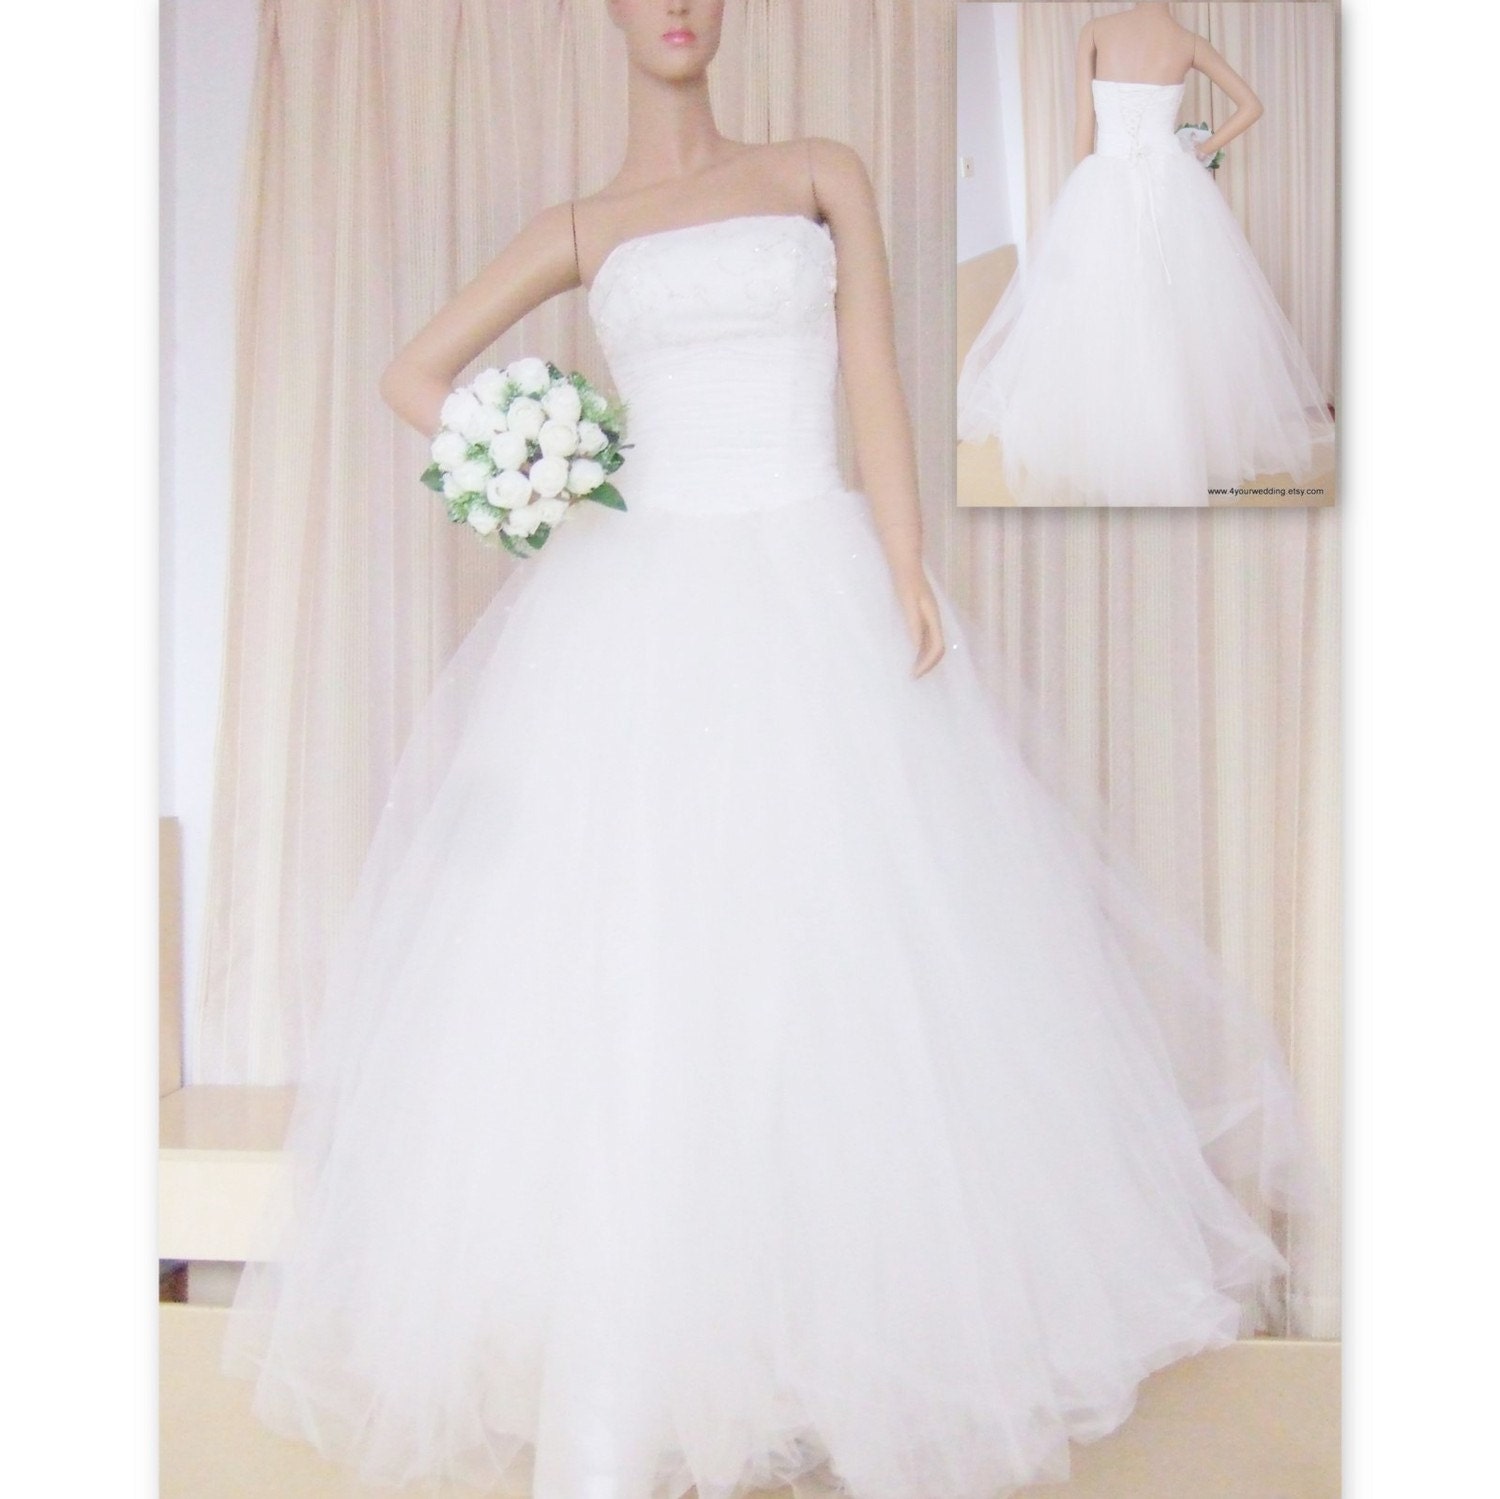 Alice in wonderland Wedding Gown From TingBridal